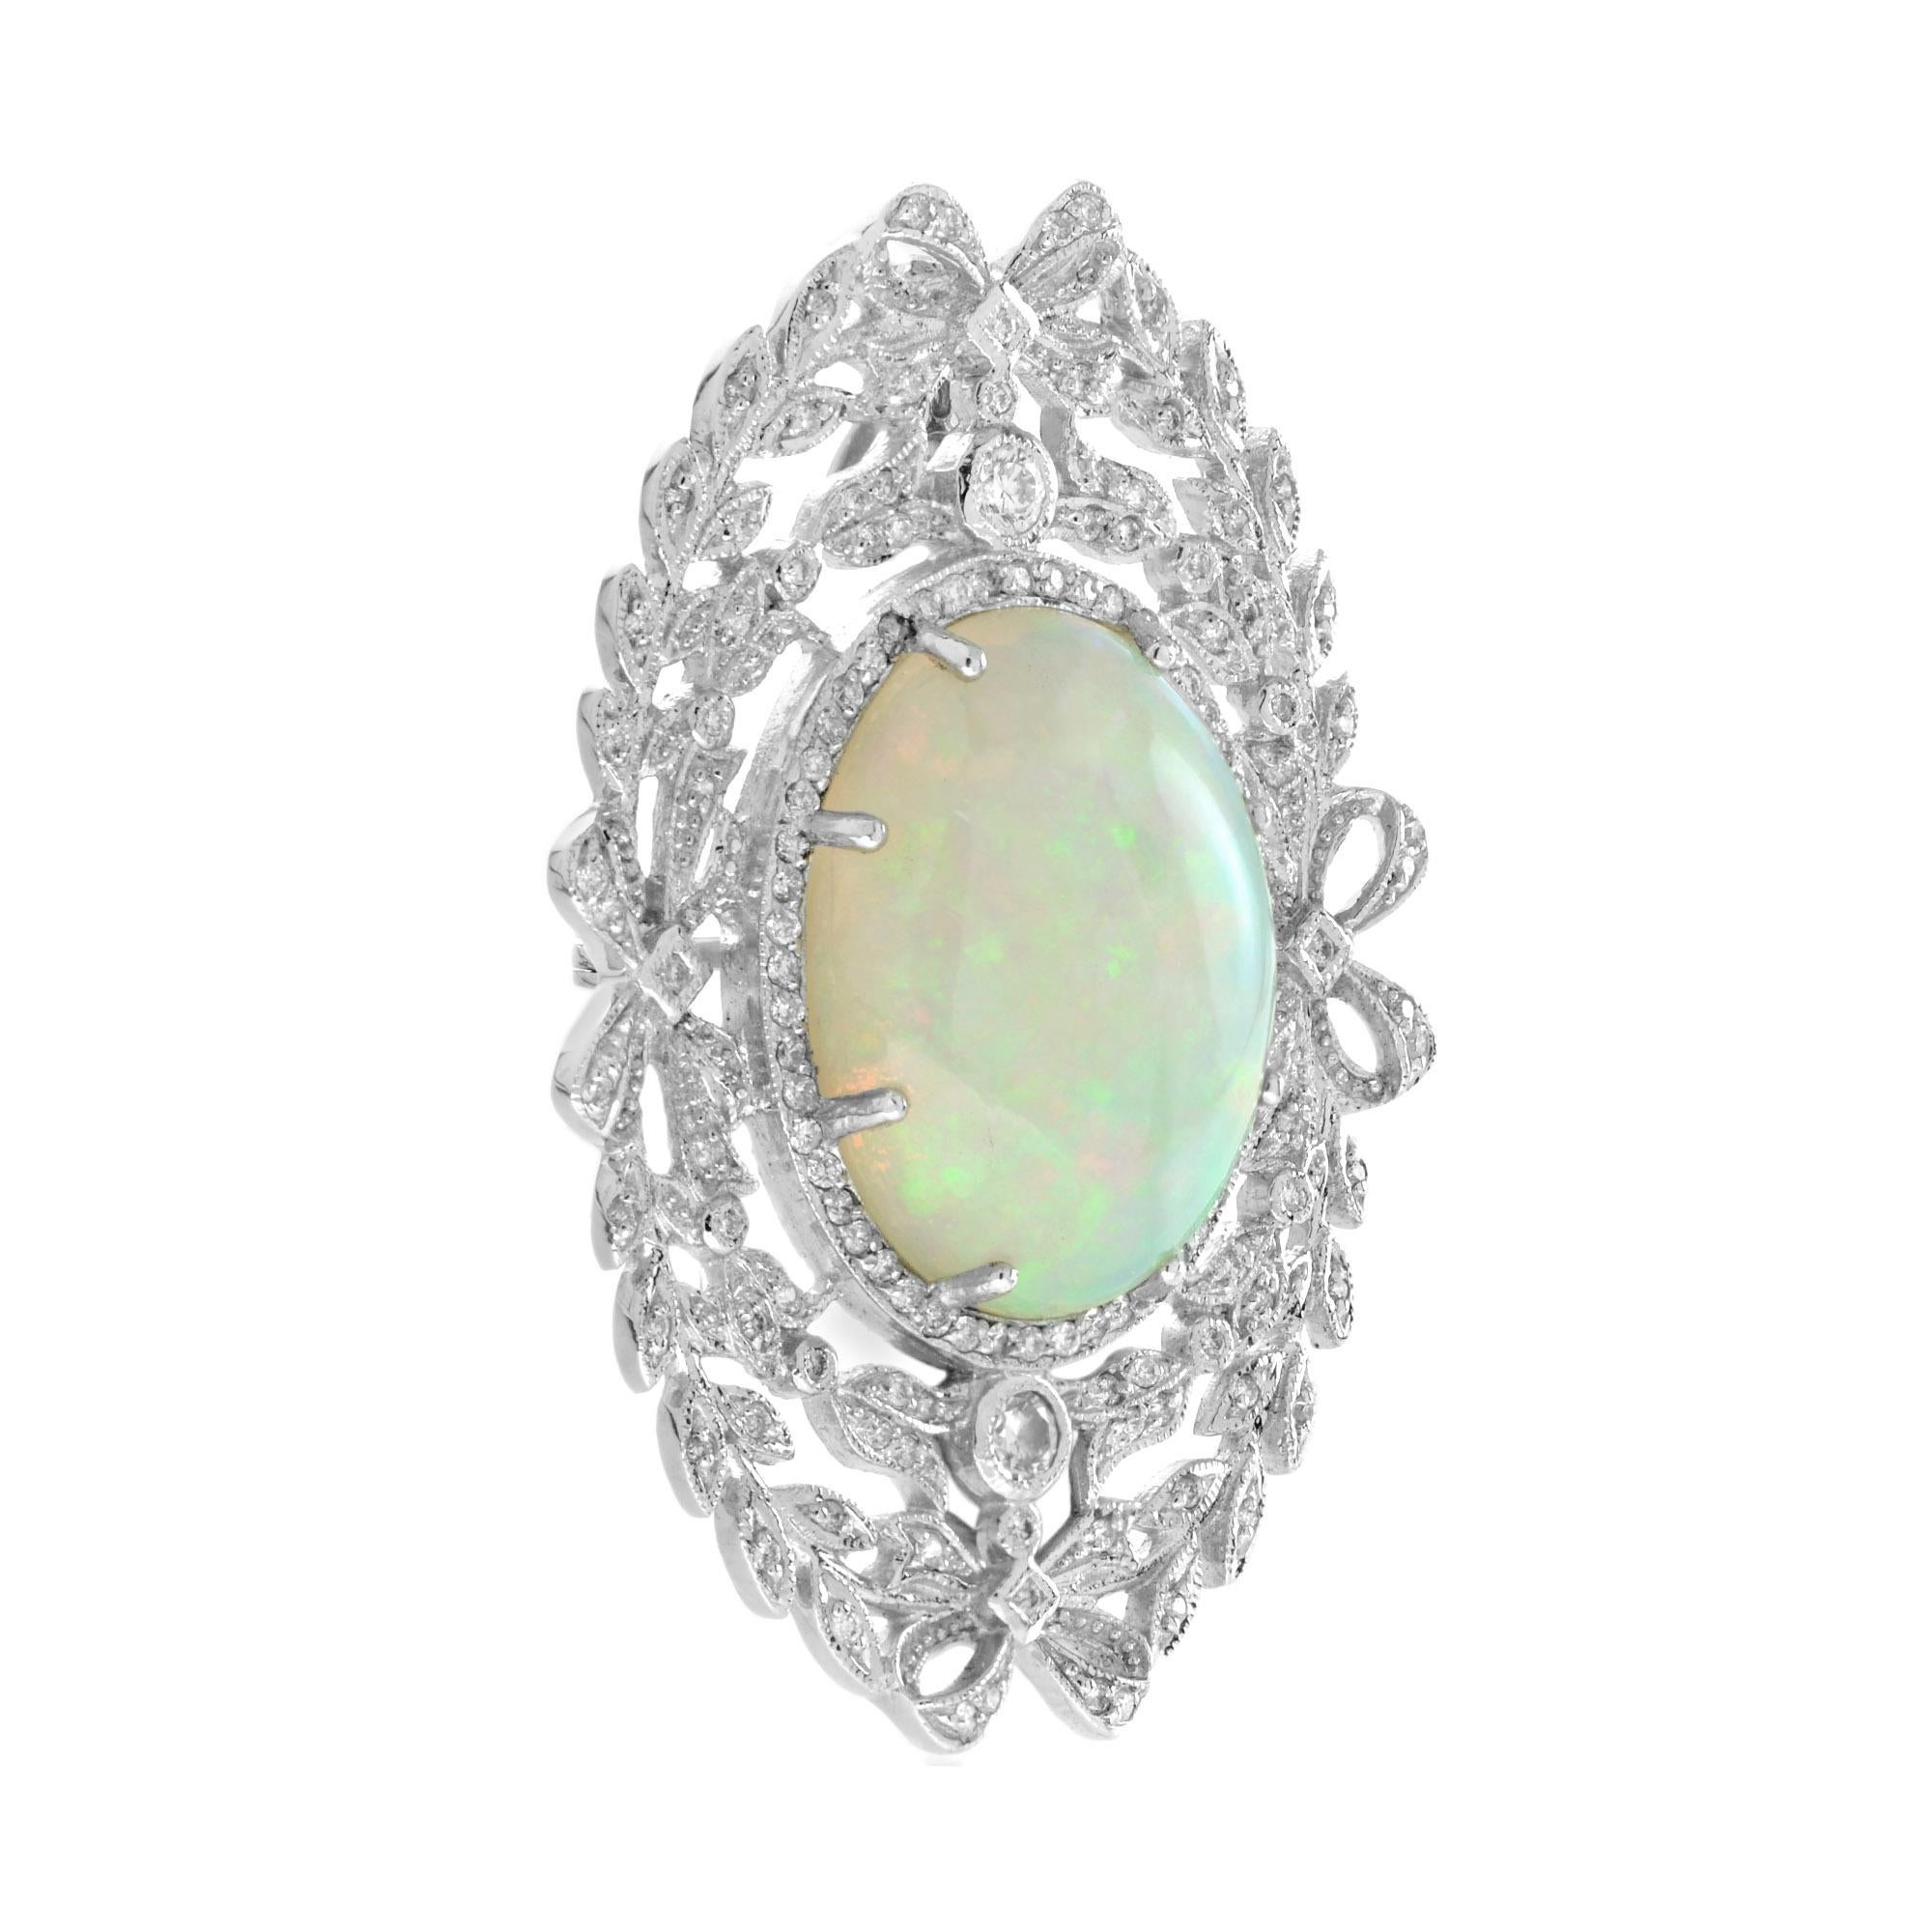 The pendant is of a typically Edwardian design, featuring foliate motifs and an exquisite bow.
Artfully fabricated in 18k white gold, the enchanting gemstone is suffused with an array of gorgeous electric pastel hues, green, orange, and violet. The